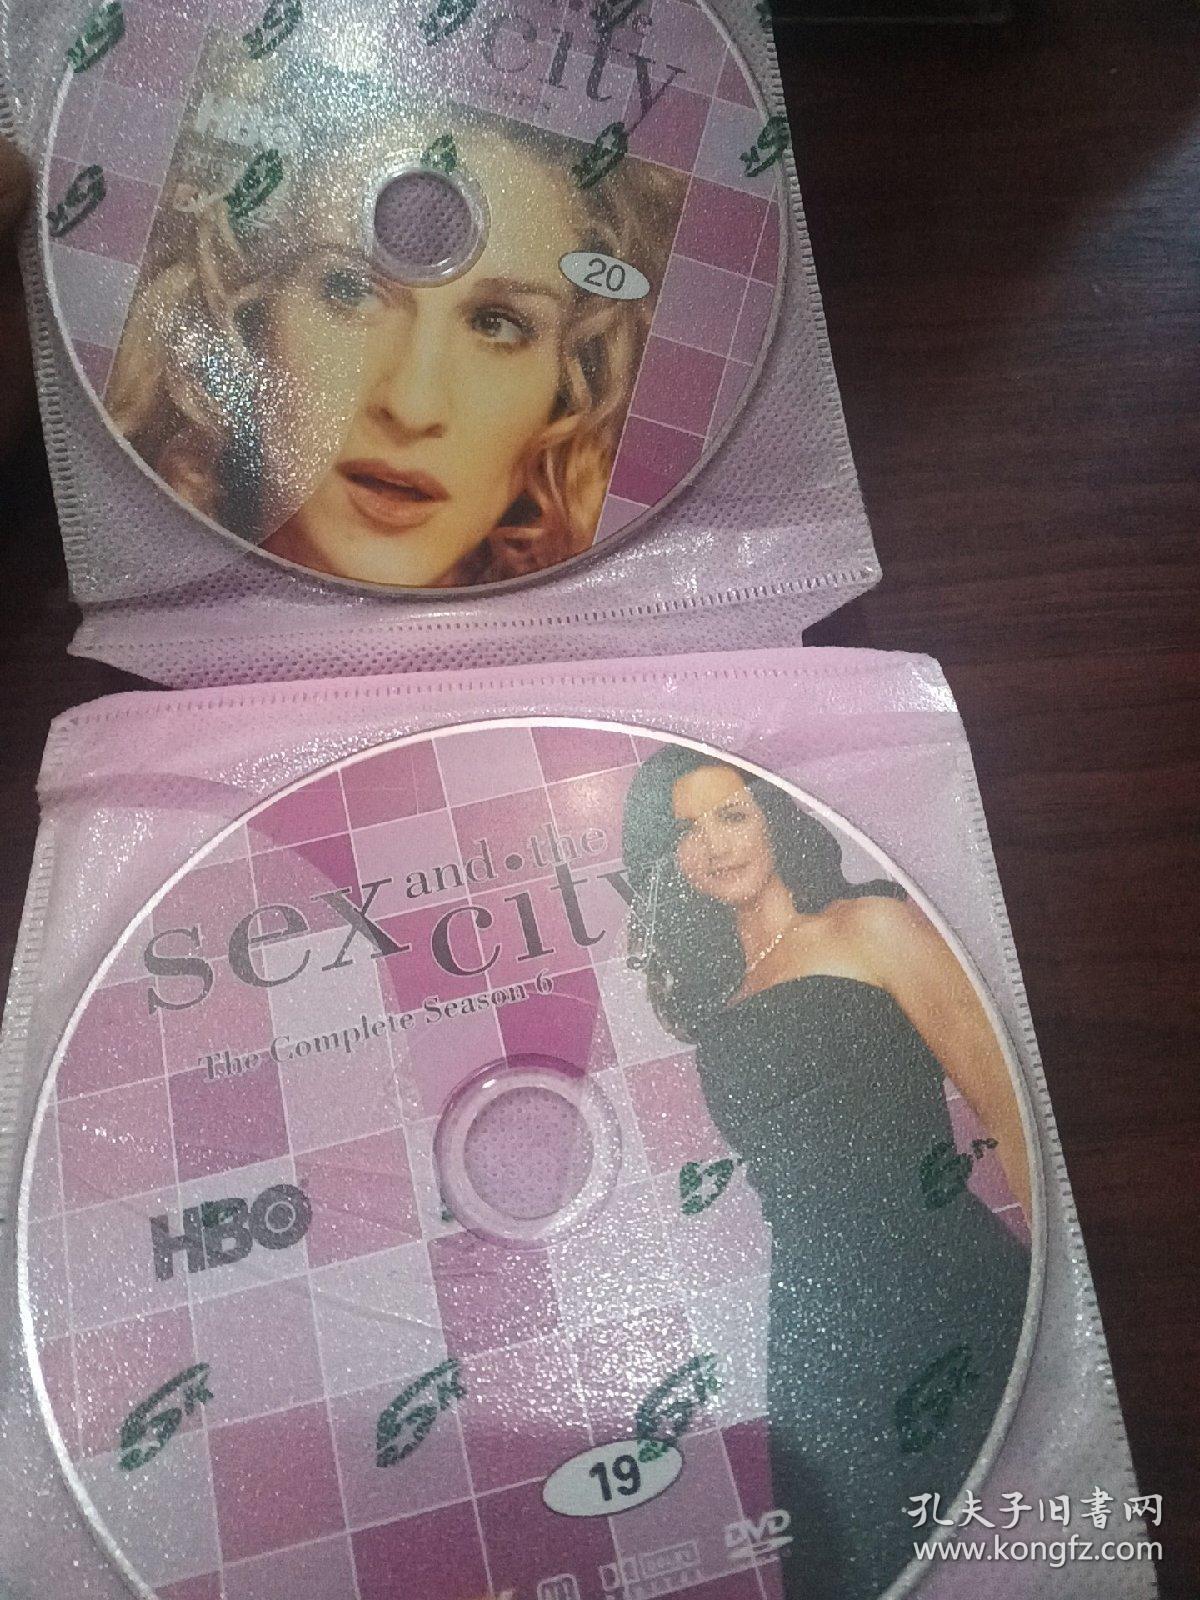 SEX AND THE CITY（20DVD）